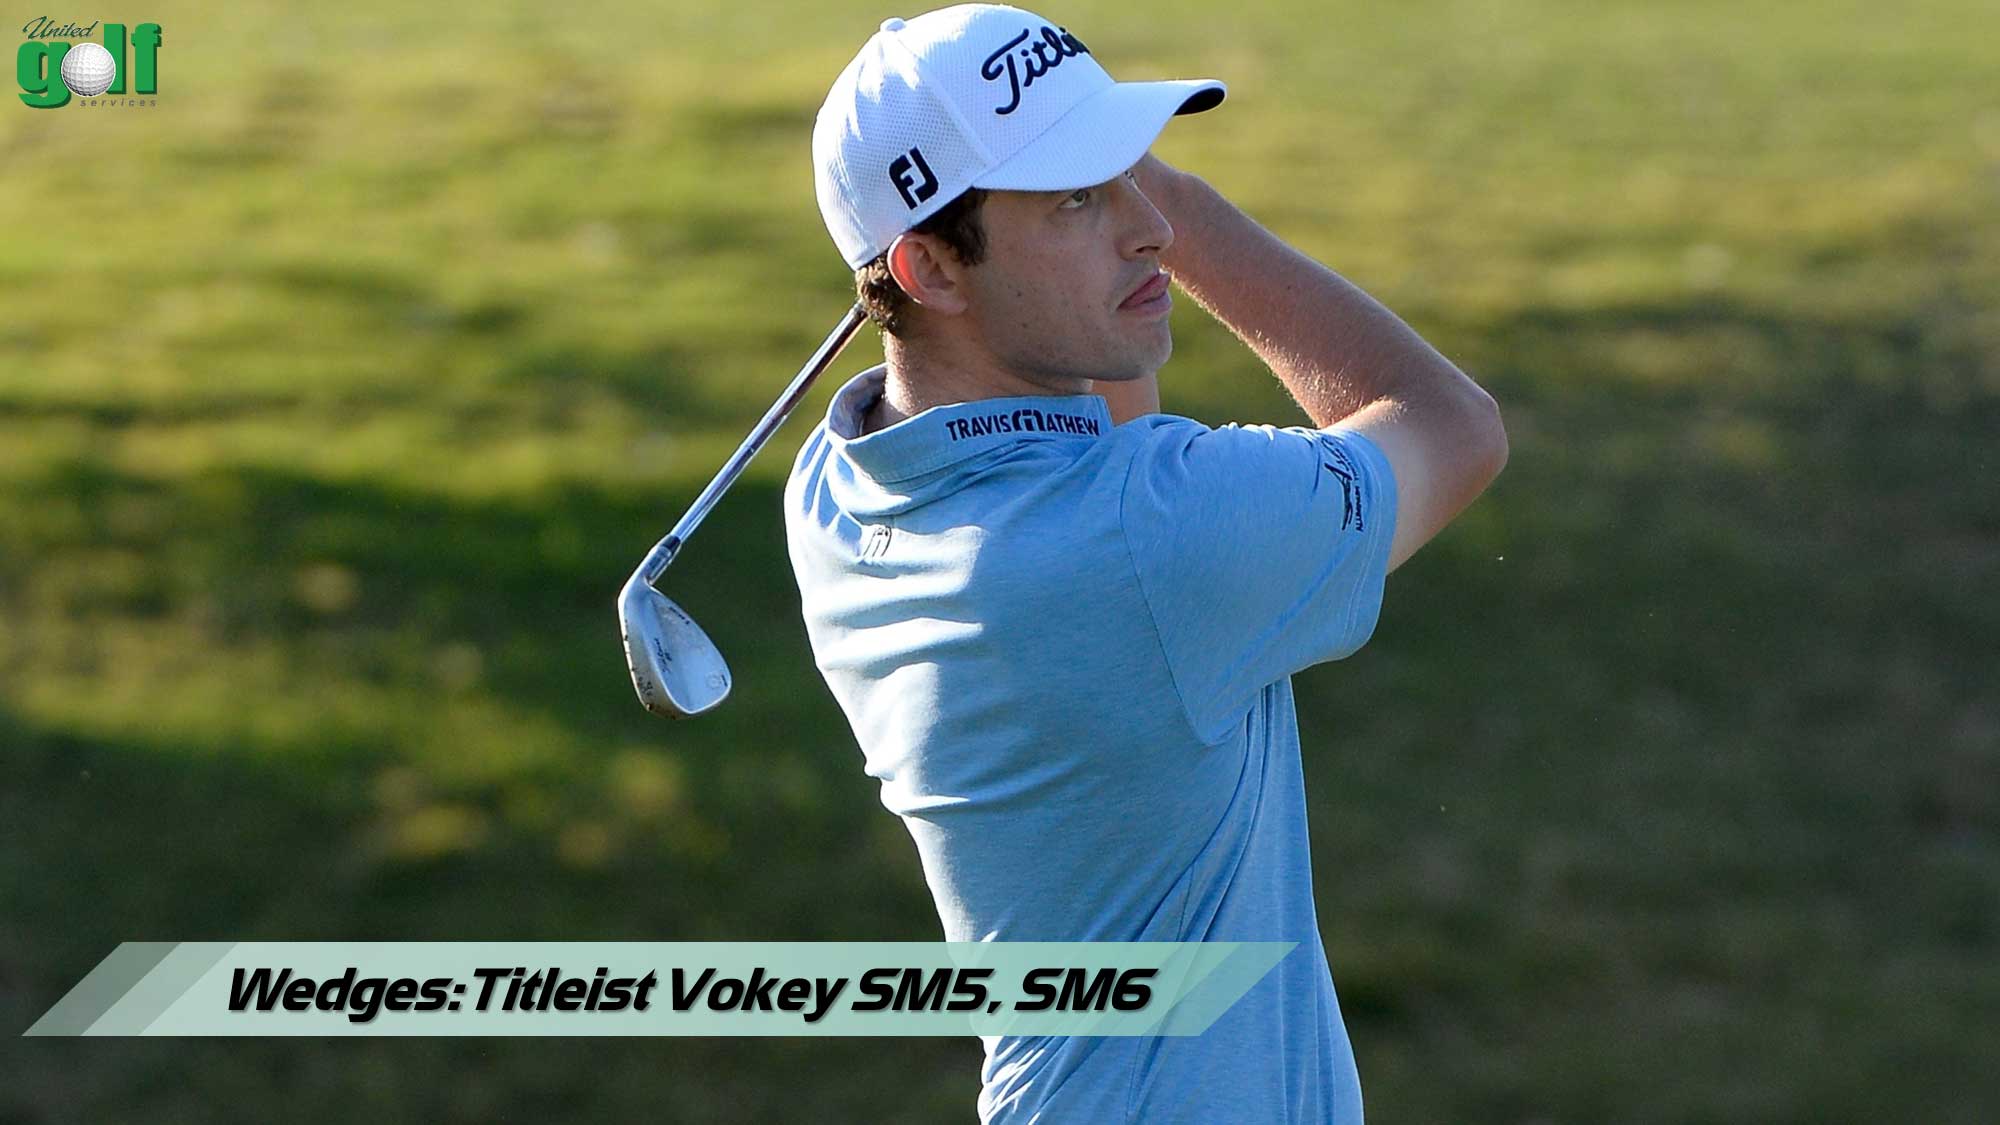 [TIPS] The Club Bag Bringing The First Pga Tour Title To Patrick Cantlay